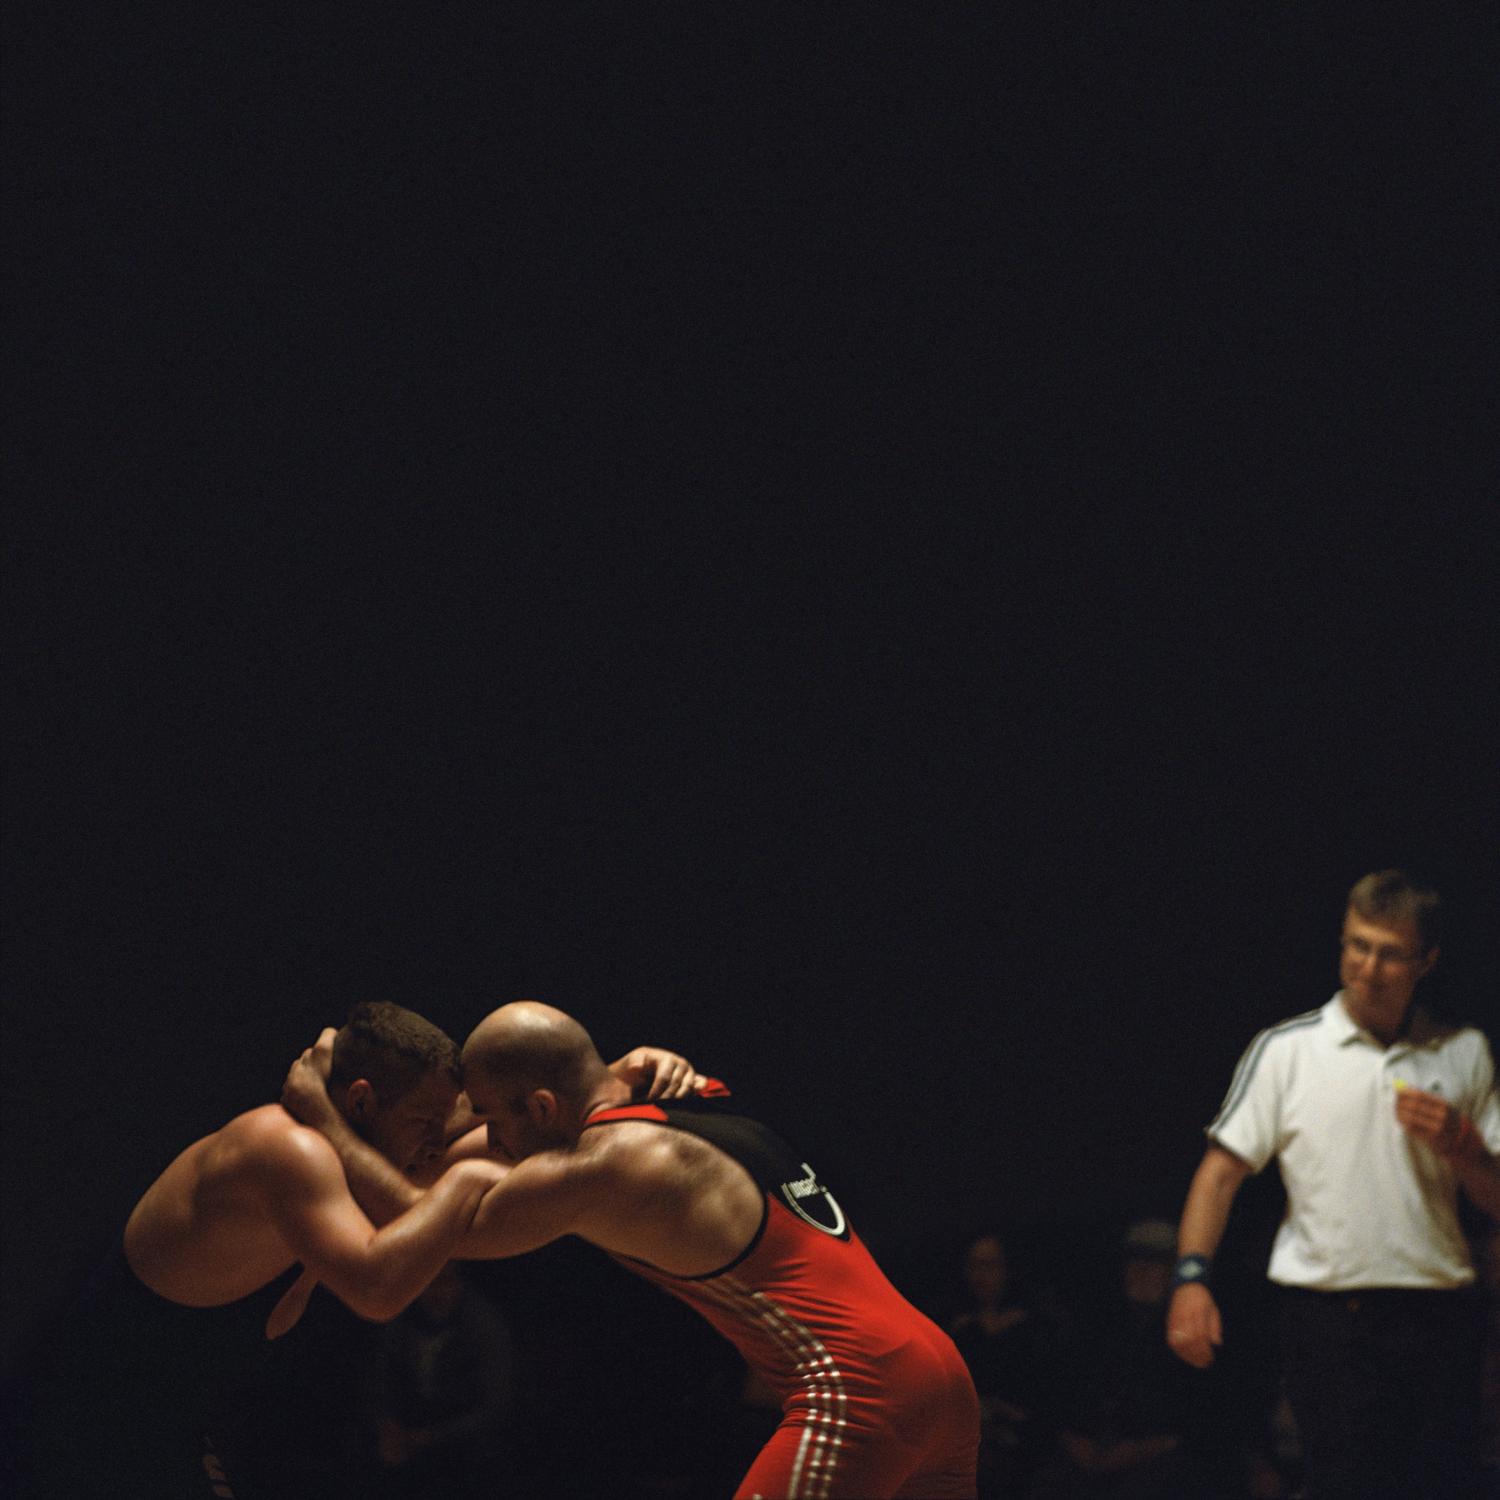 Wrestling - S. is a professional fighter. A Daghestani refugee and...